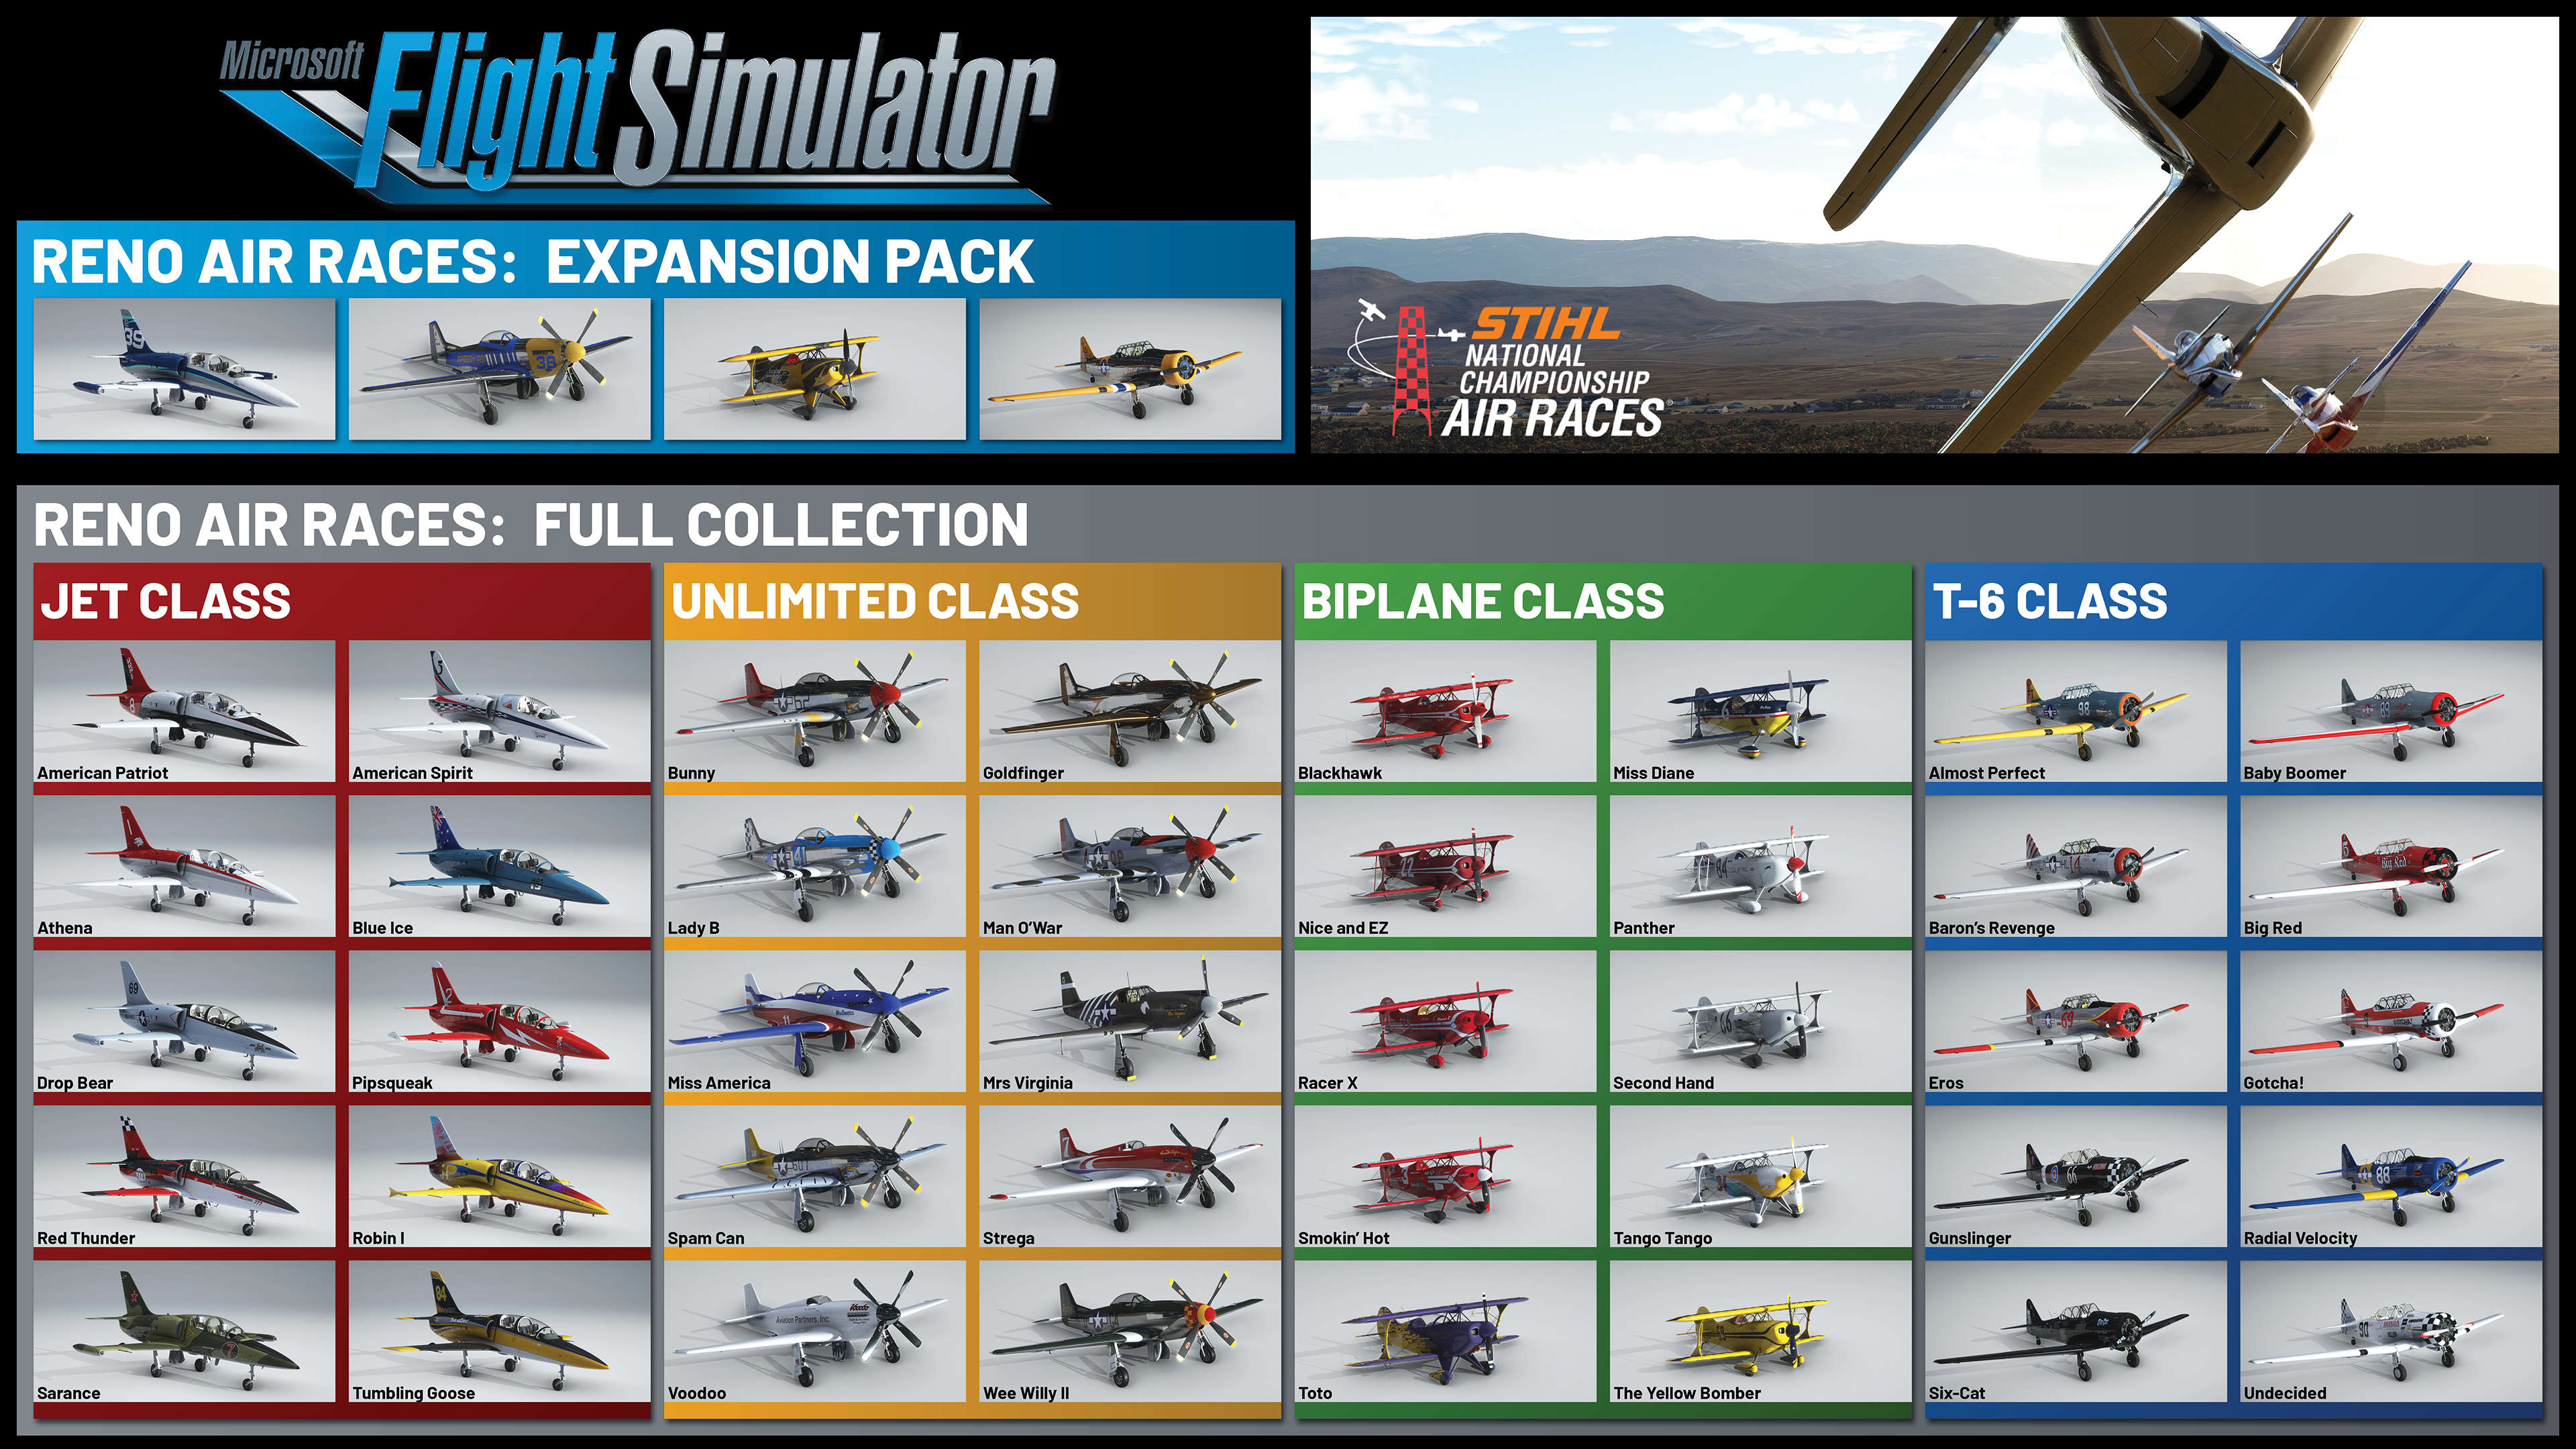 Reno Air Races: Expansion Pack